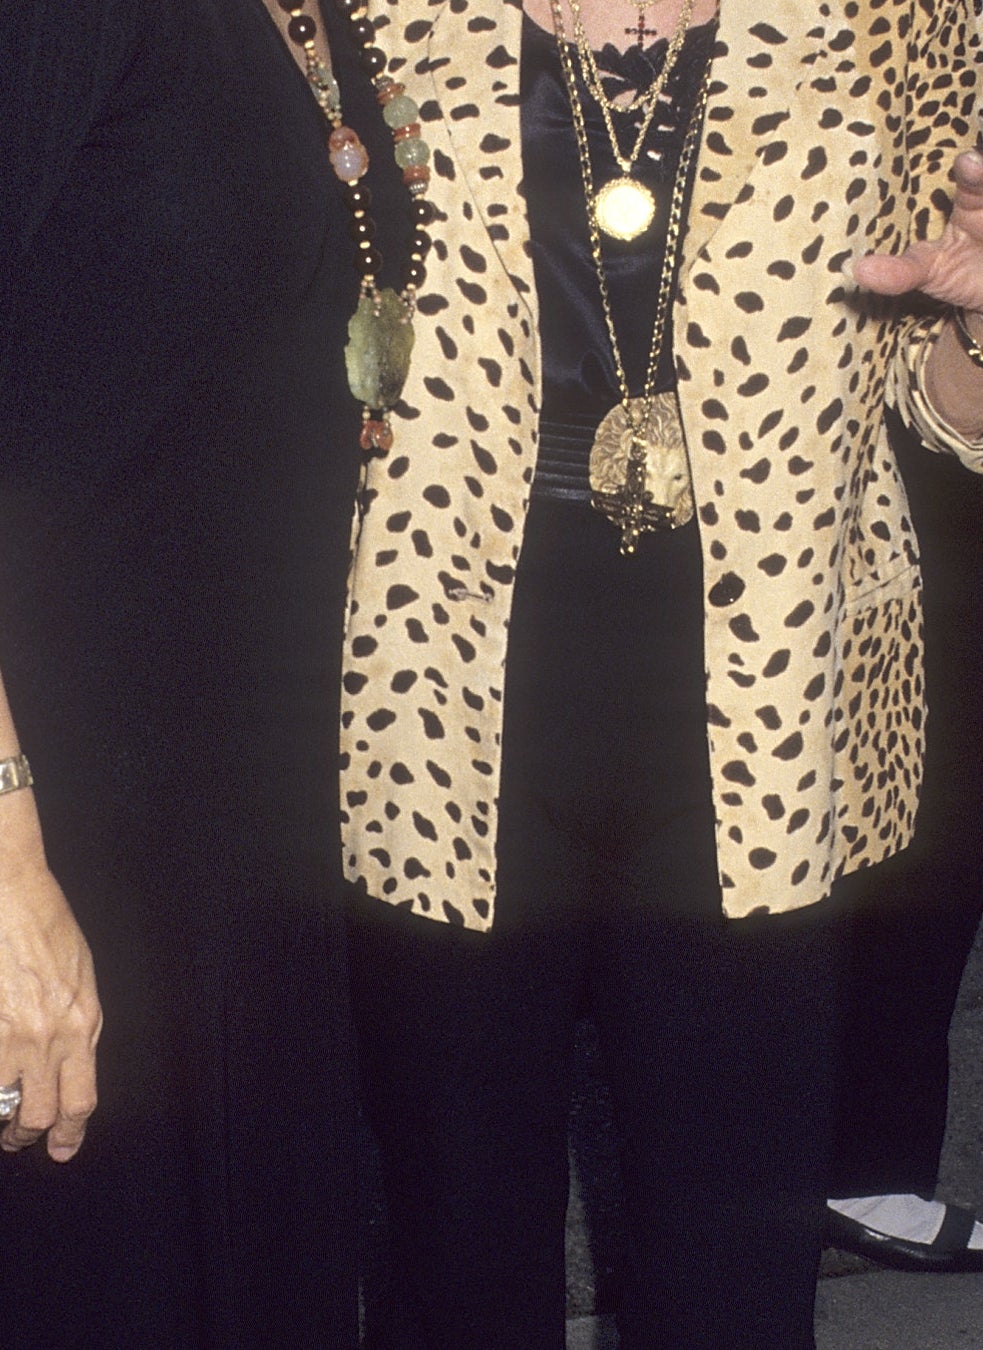 Actress Kieu Chinh and actress Tippi Hedren at the screening of &quot;The Joy Luck Club&quot; on August 28, 1993 at the Crest Theater in Westwood, California